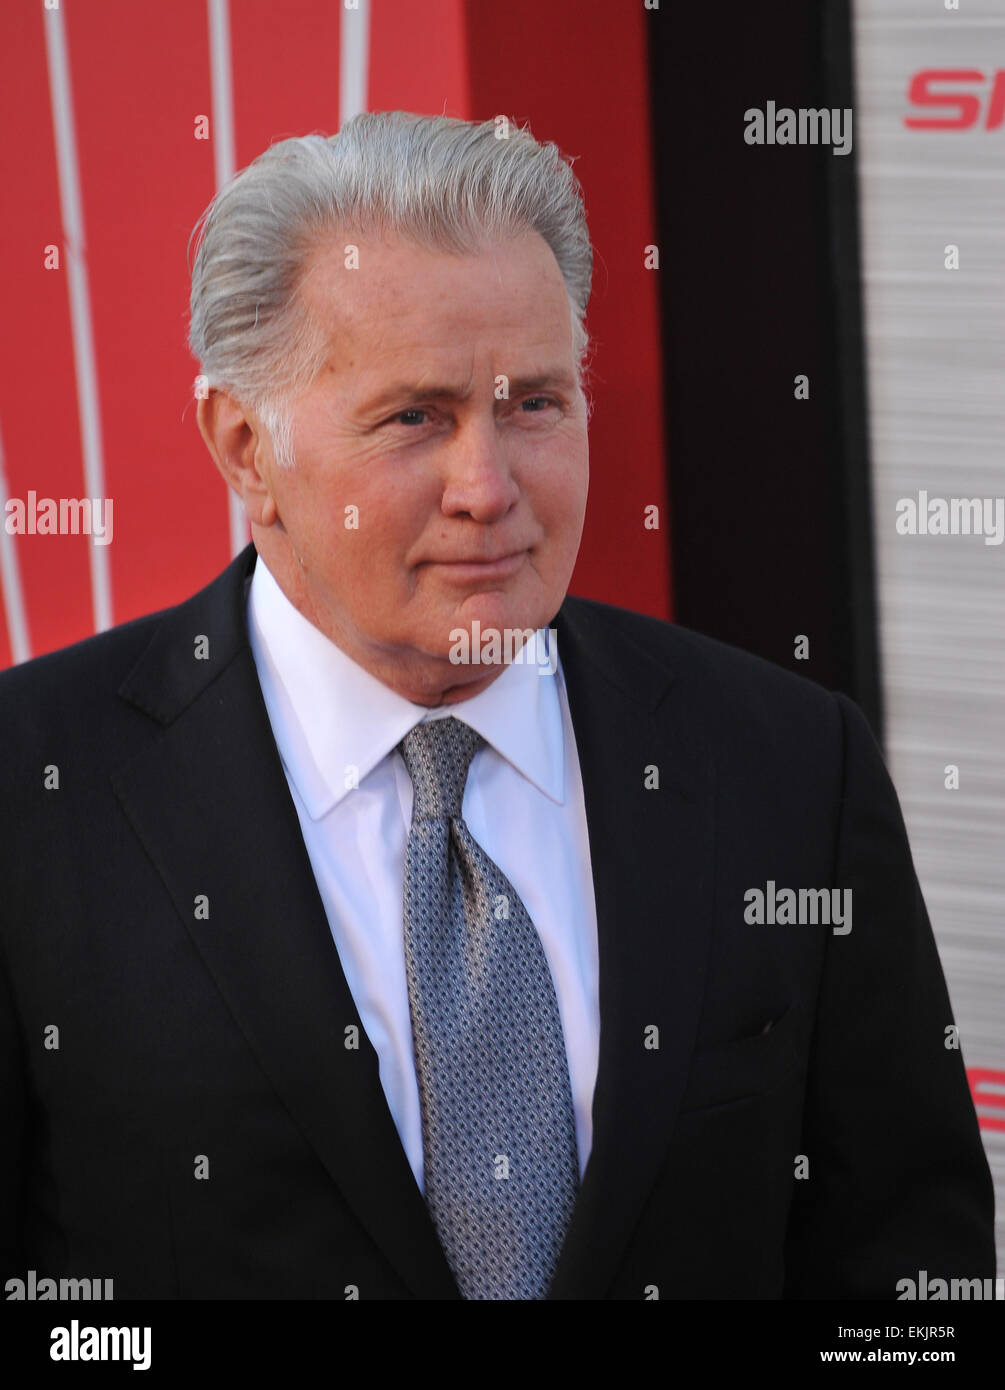 LOS ANGELES, CA - JUNE 29, 2012: Martin Sheen at the world premiere of his movie 'The Amazing Spider-Man' at Regency Village Theatre, Westwood. Stock Photo